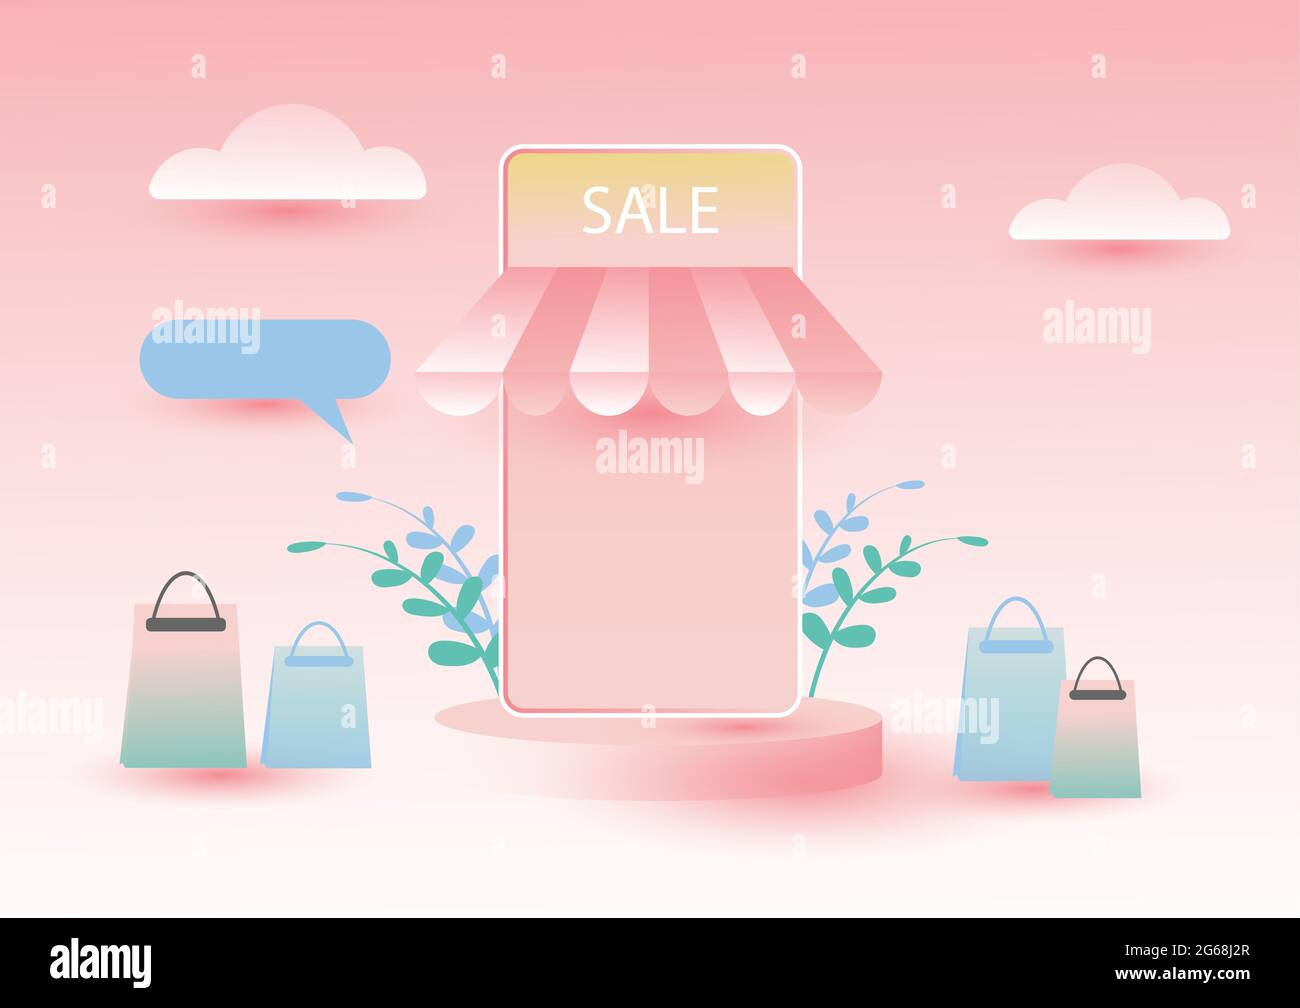 Online shopping concept on the pink background Stock Photo